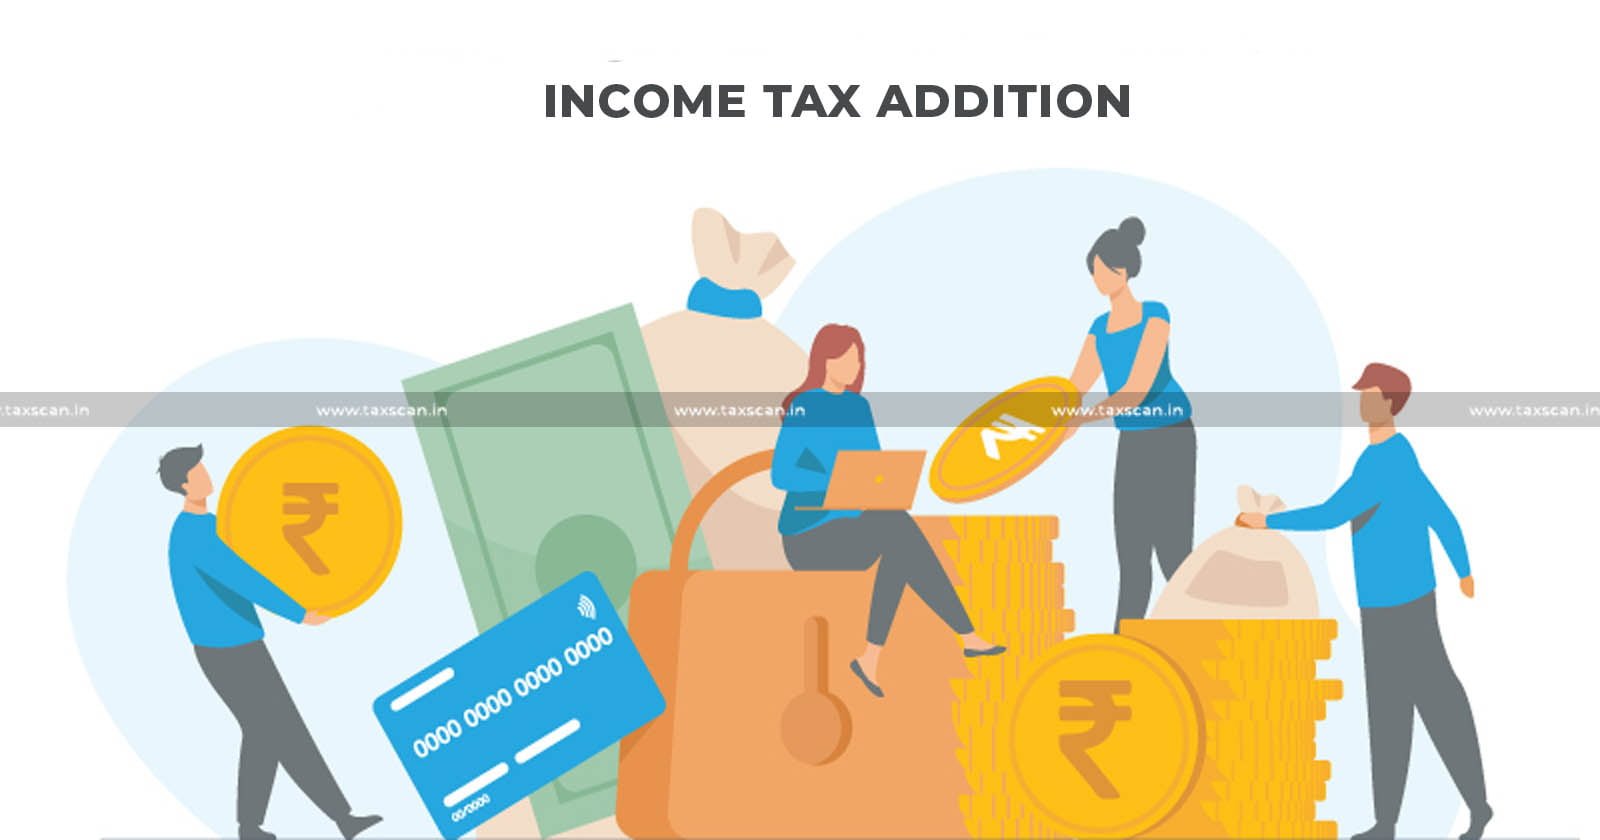 Repetition of Addition - Addition - Income Tax Addition - Repetition of Addition by AO - AO - Non-Compliance to Order - Verification - ITAT deletes Addition - ITAT - taxscan